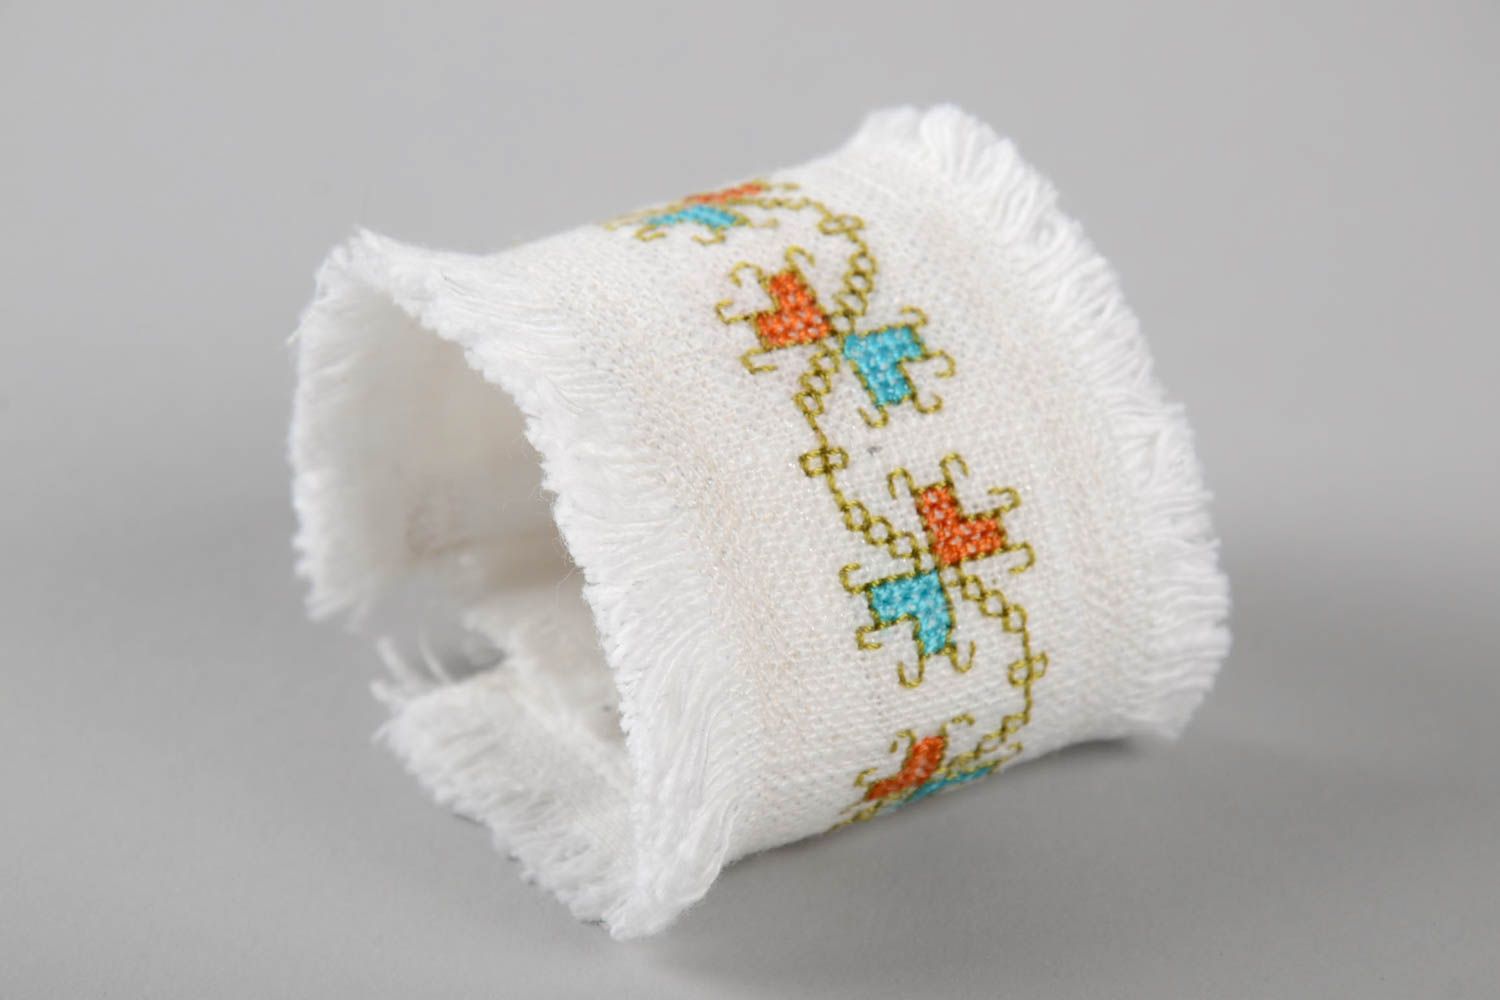 Handmade bracelet with embroidery wide bracelet in ethnic style designer jewelry photo 4